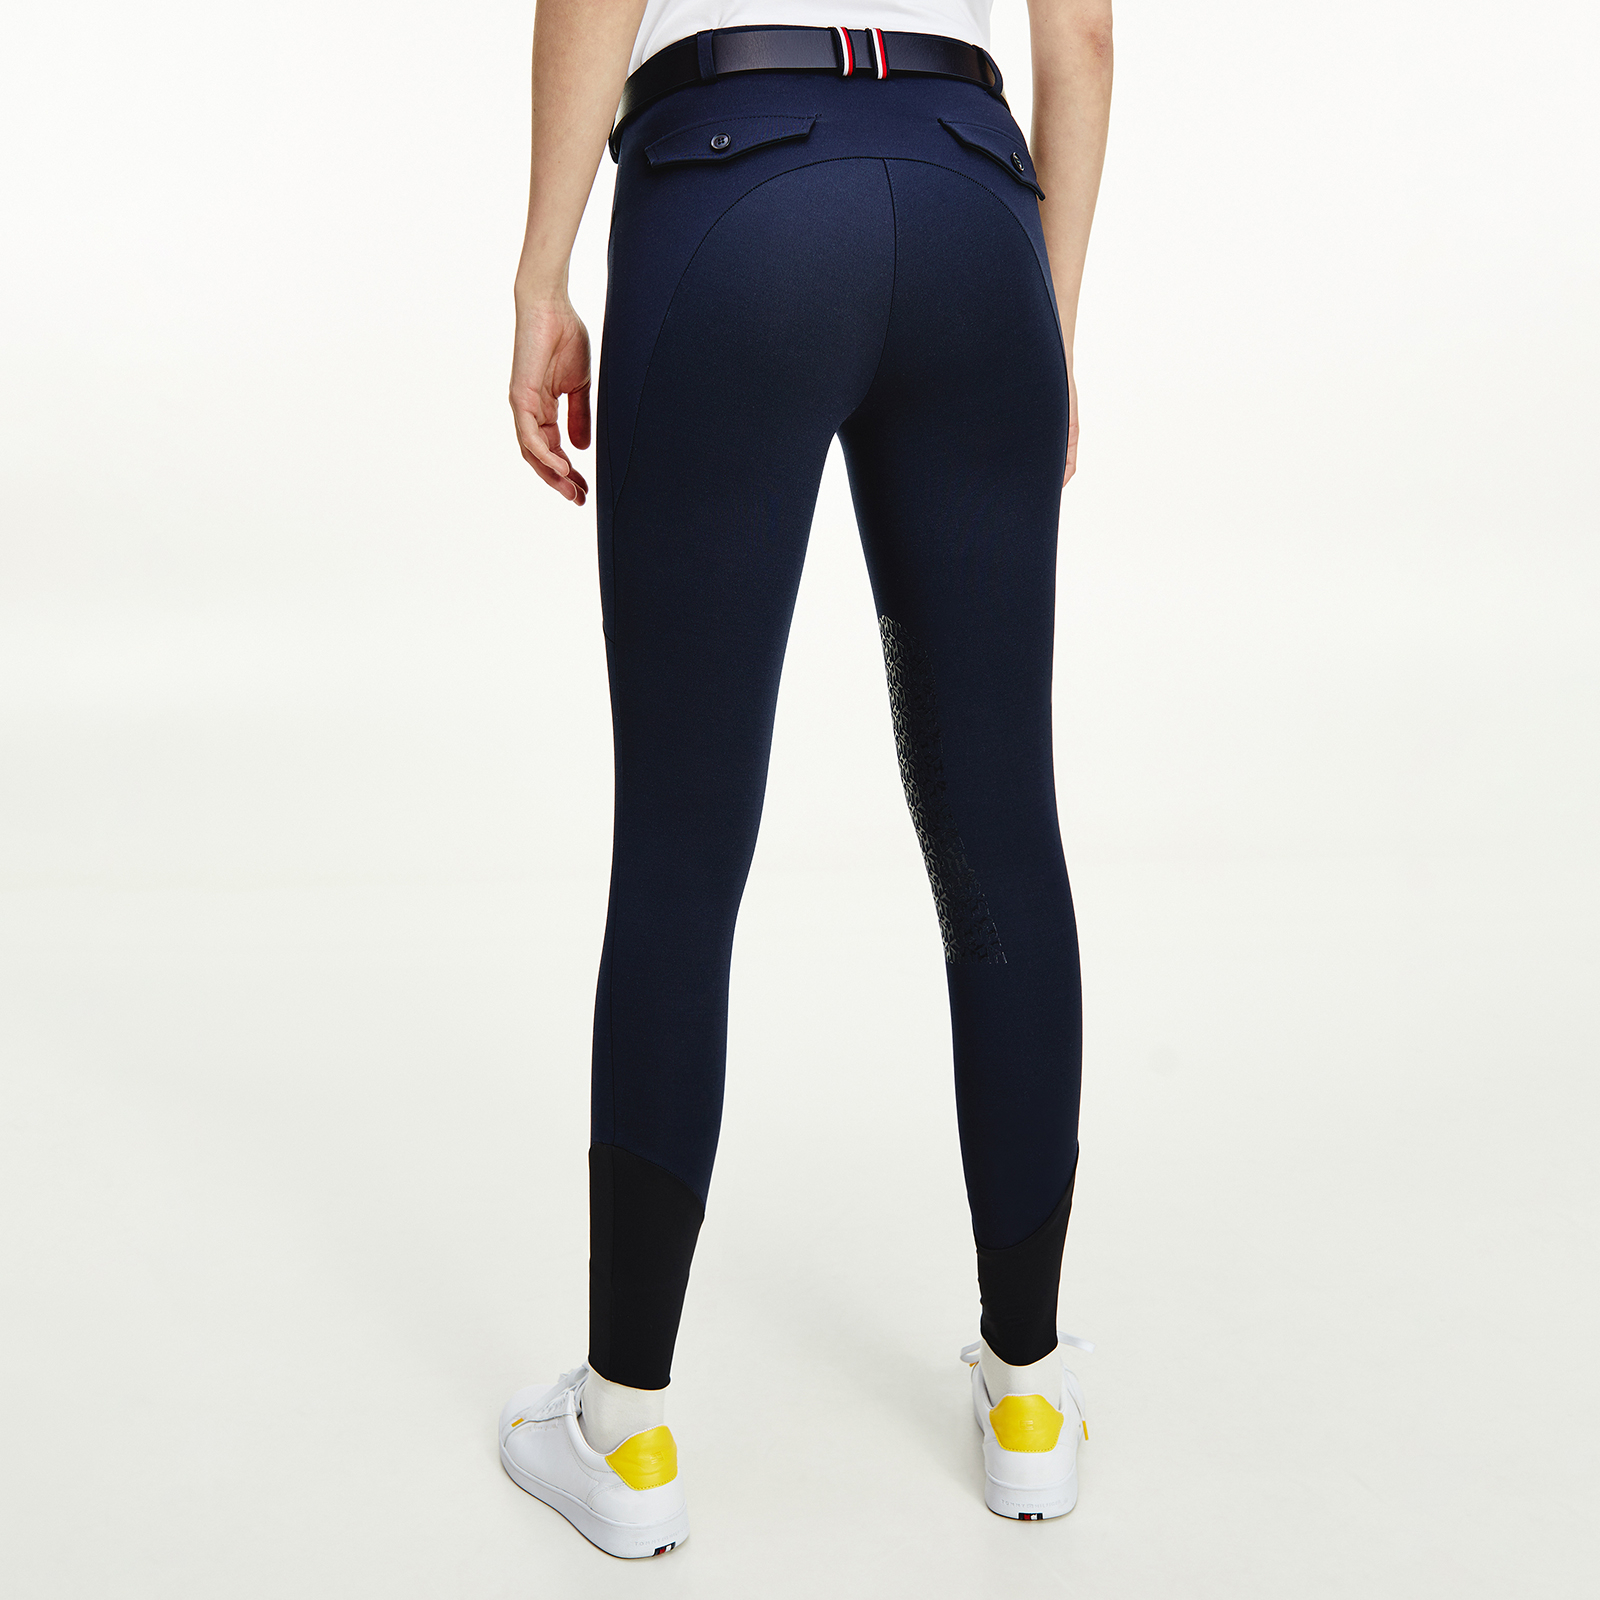 Buy Tommy Hilfiger Equestrian Performance Women's Show Breeches